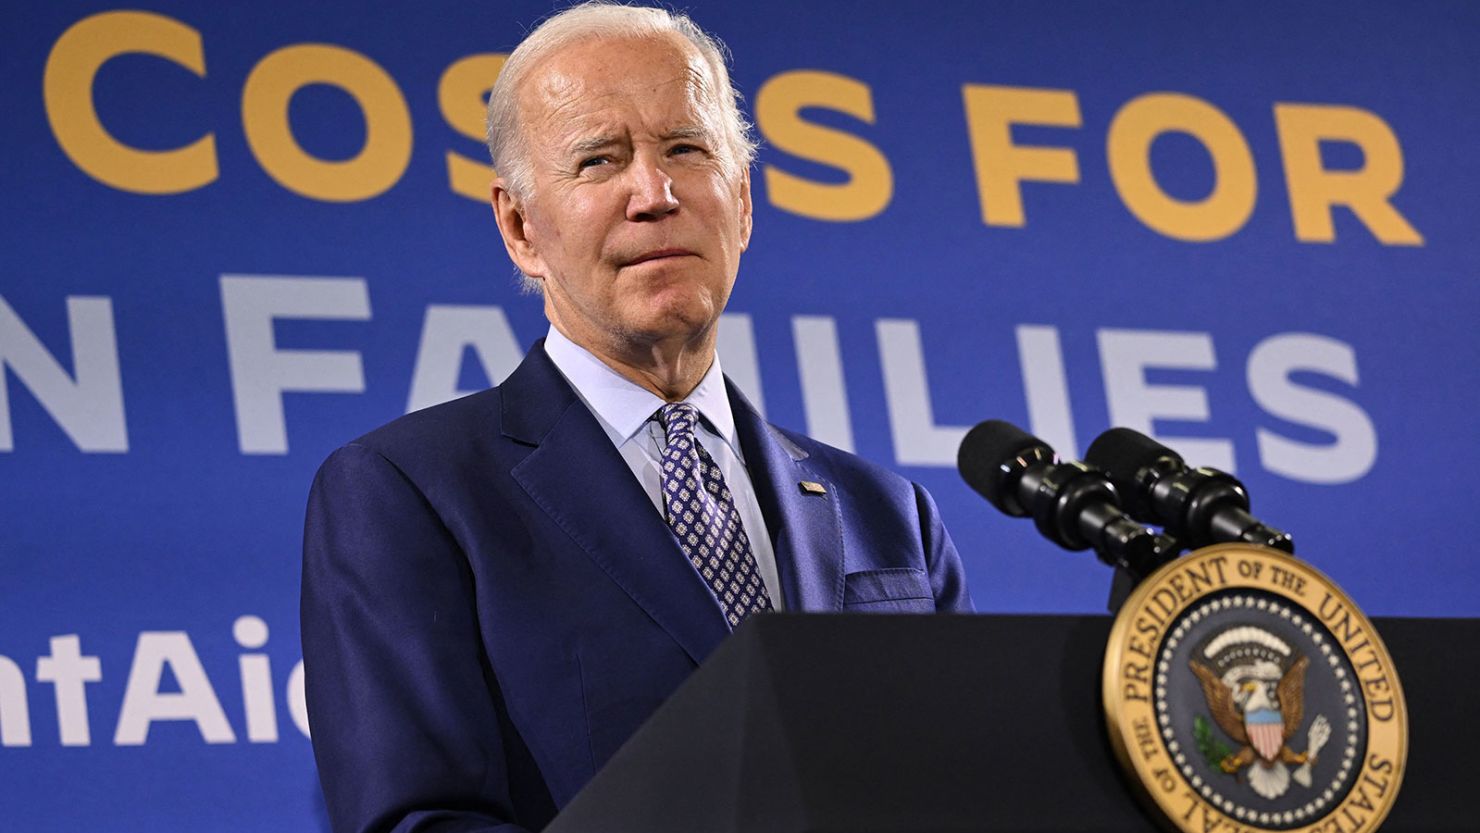 President Joe Biden speaks about student debt relief at the Central New Mexico Community College Student Resource Center in Albuquerque, New Mexico, on November 3, 2022.